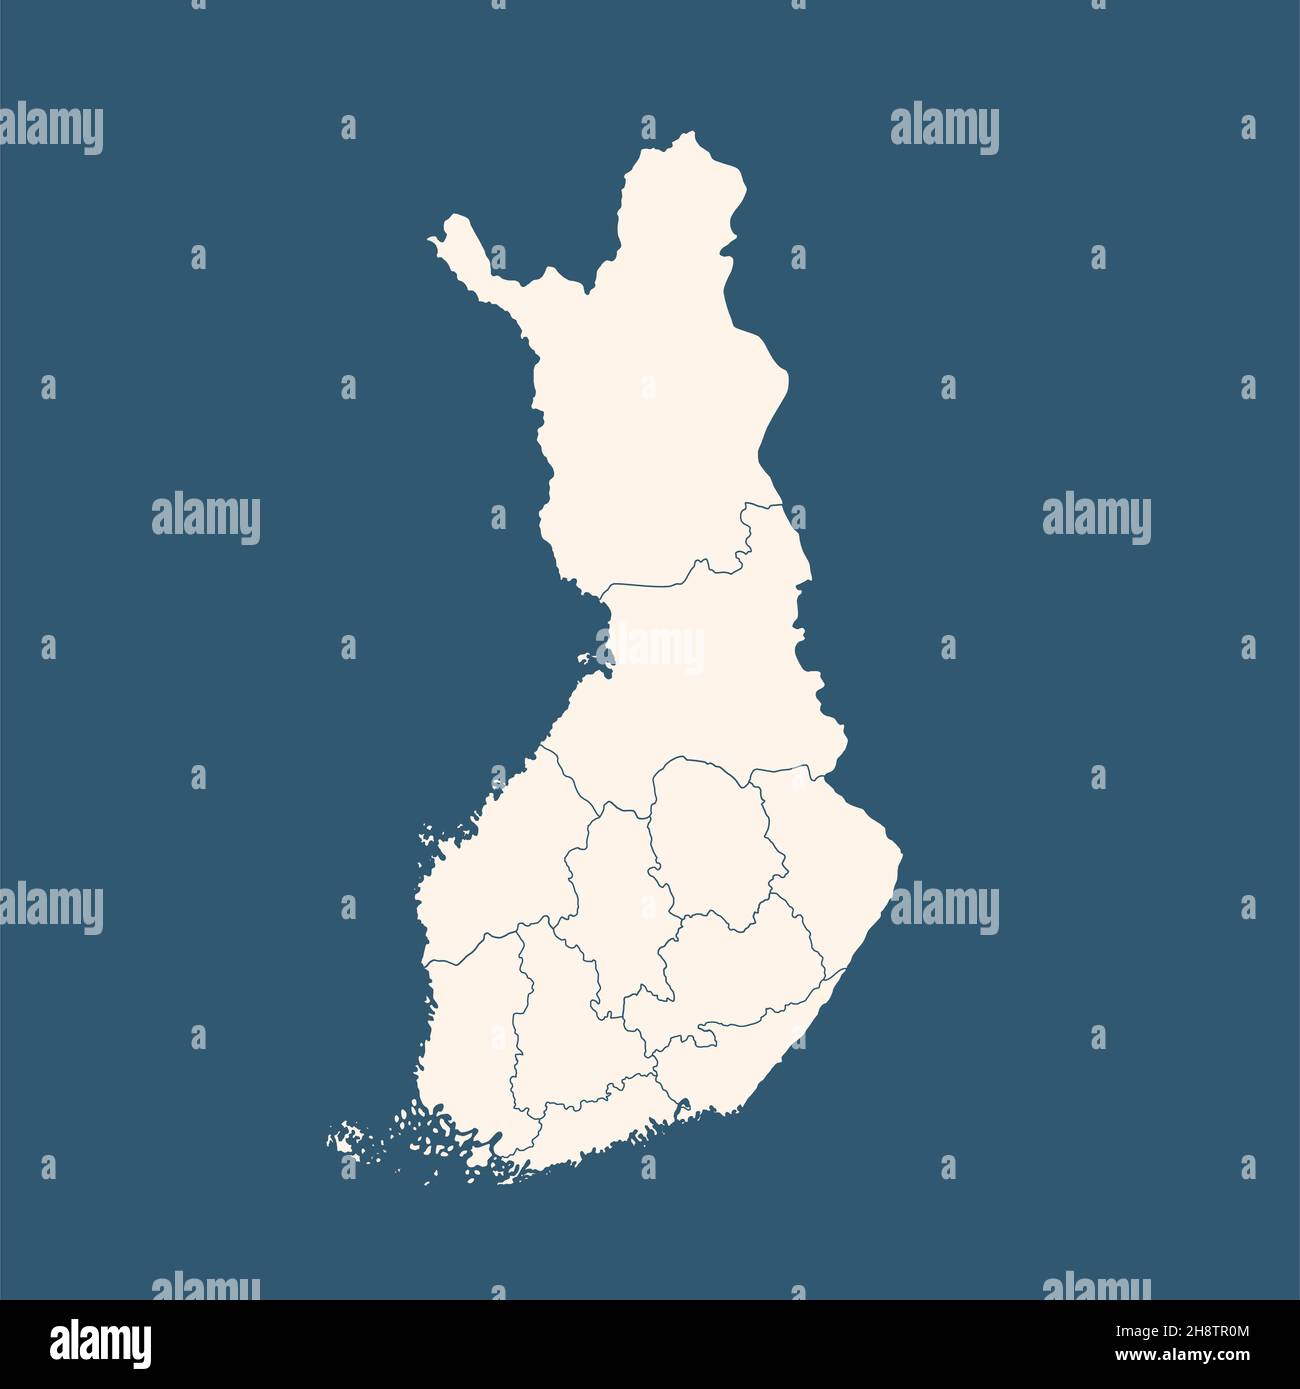 Finland outline map isolated on a blue background. Stock Photo